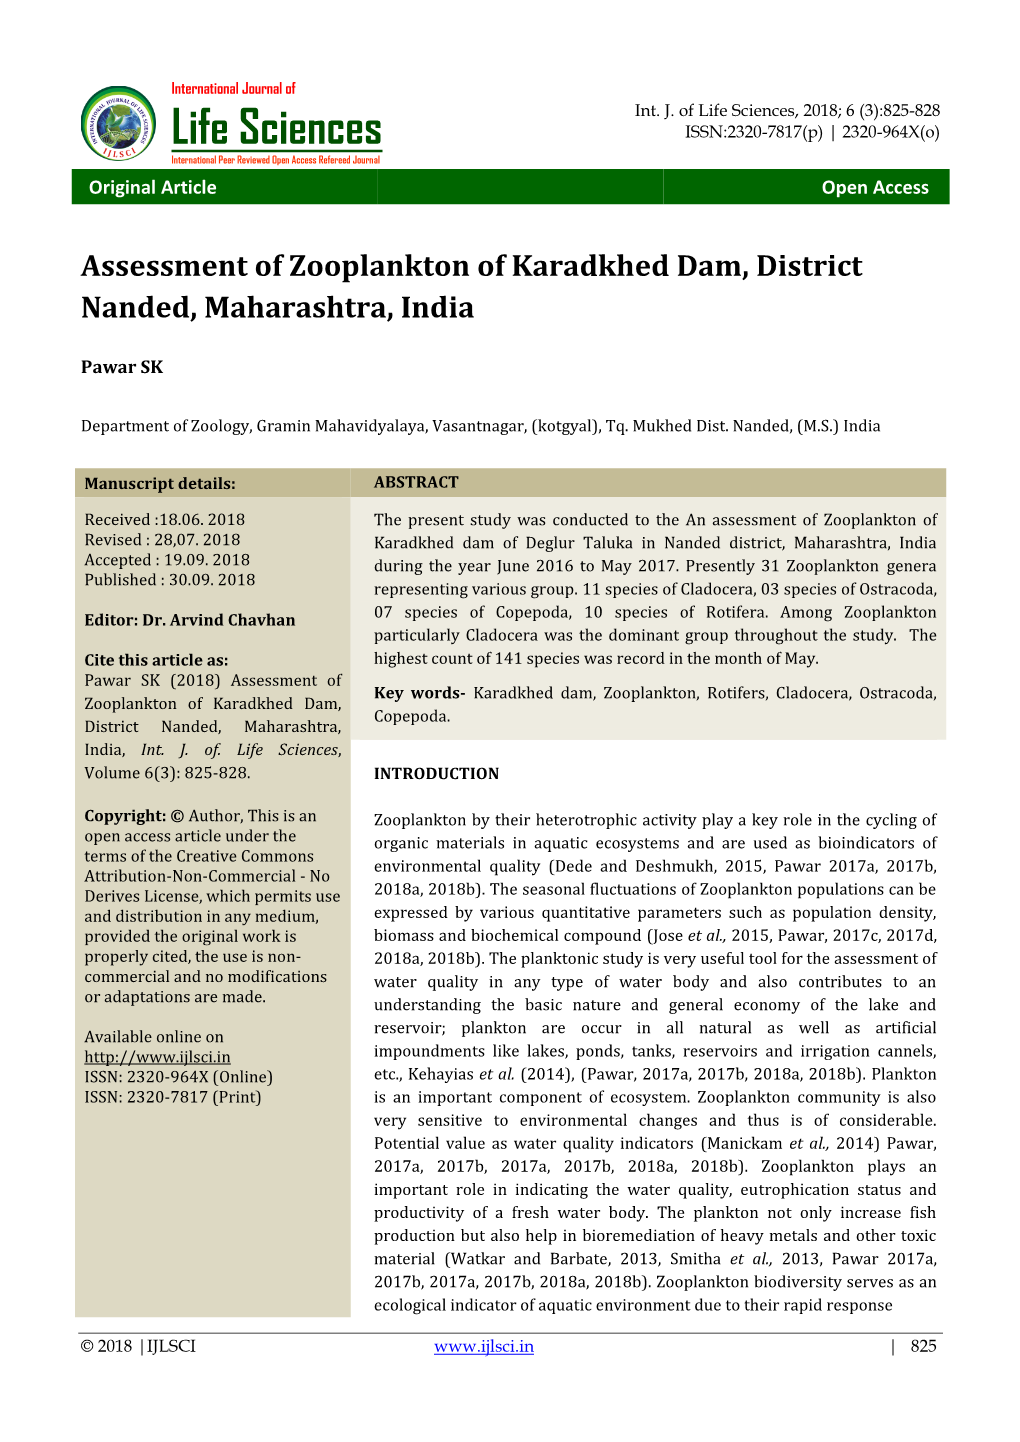 Assessment of Zooplankton of Karadkhed Dam, District Nanded, Maharashtra, India